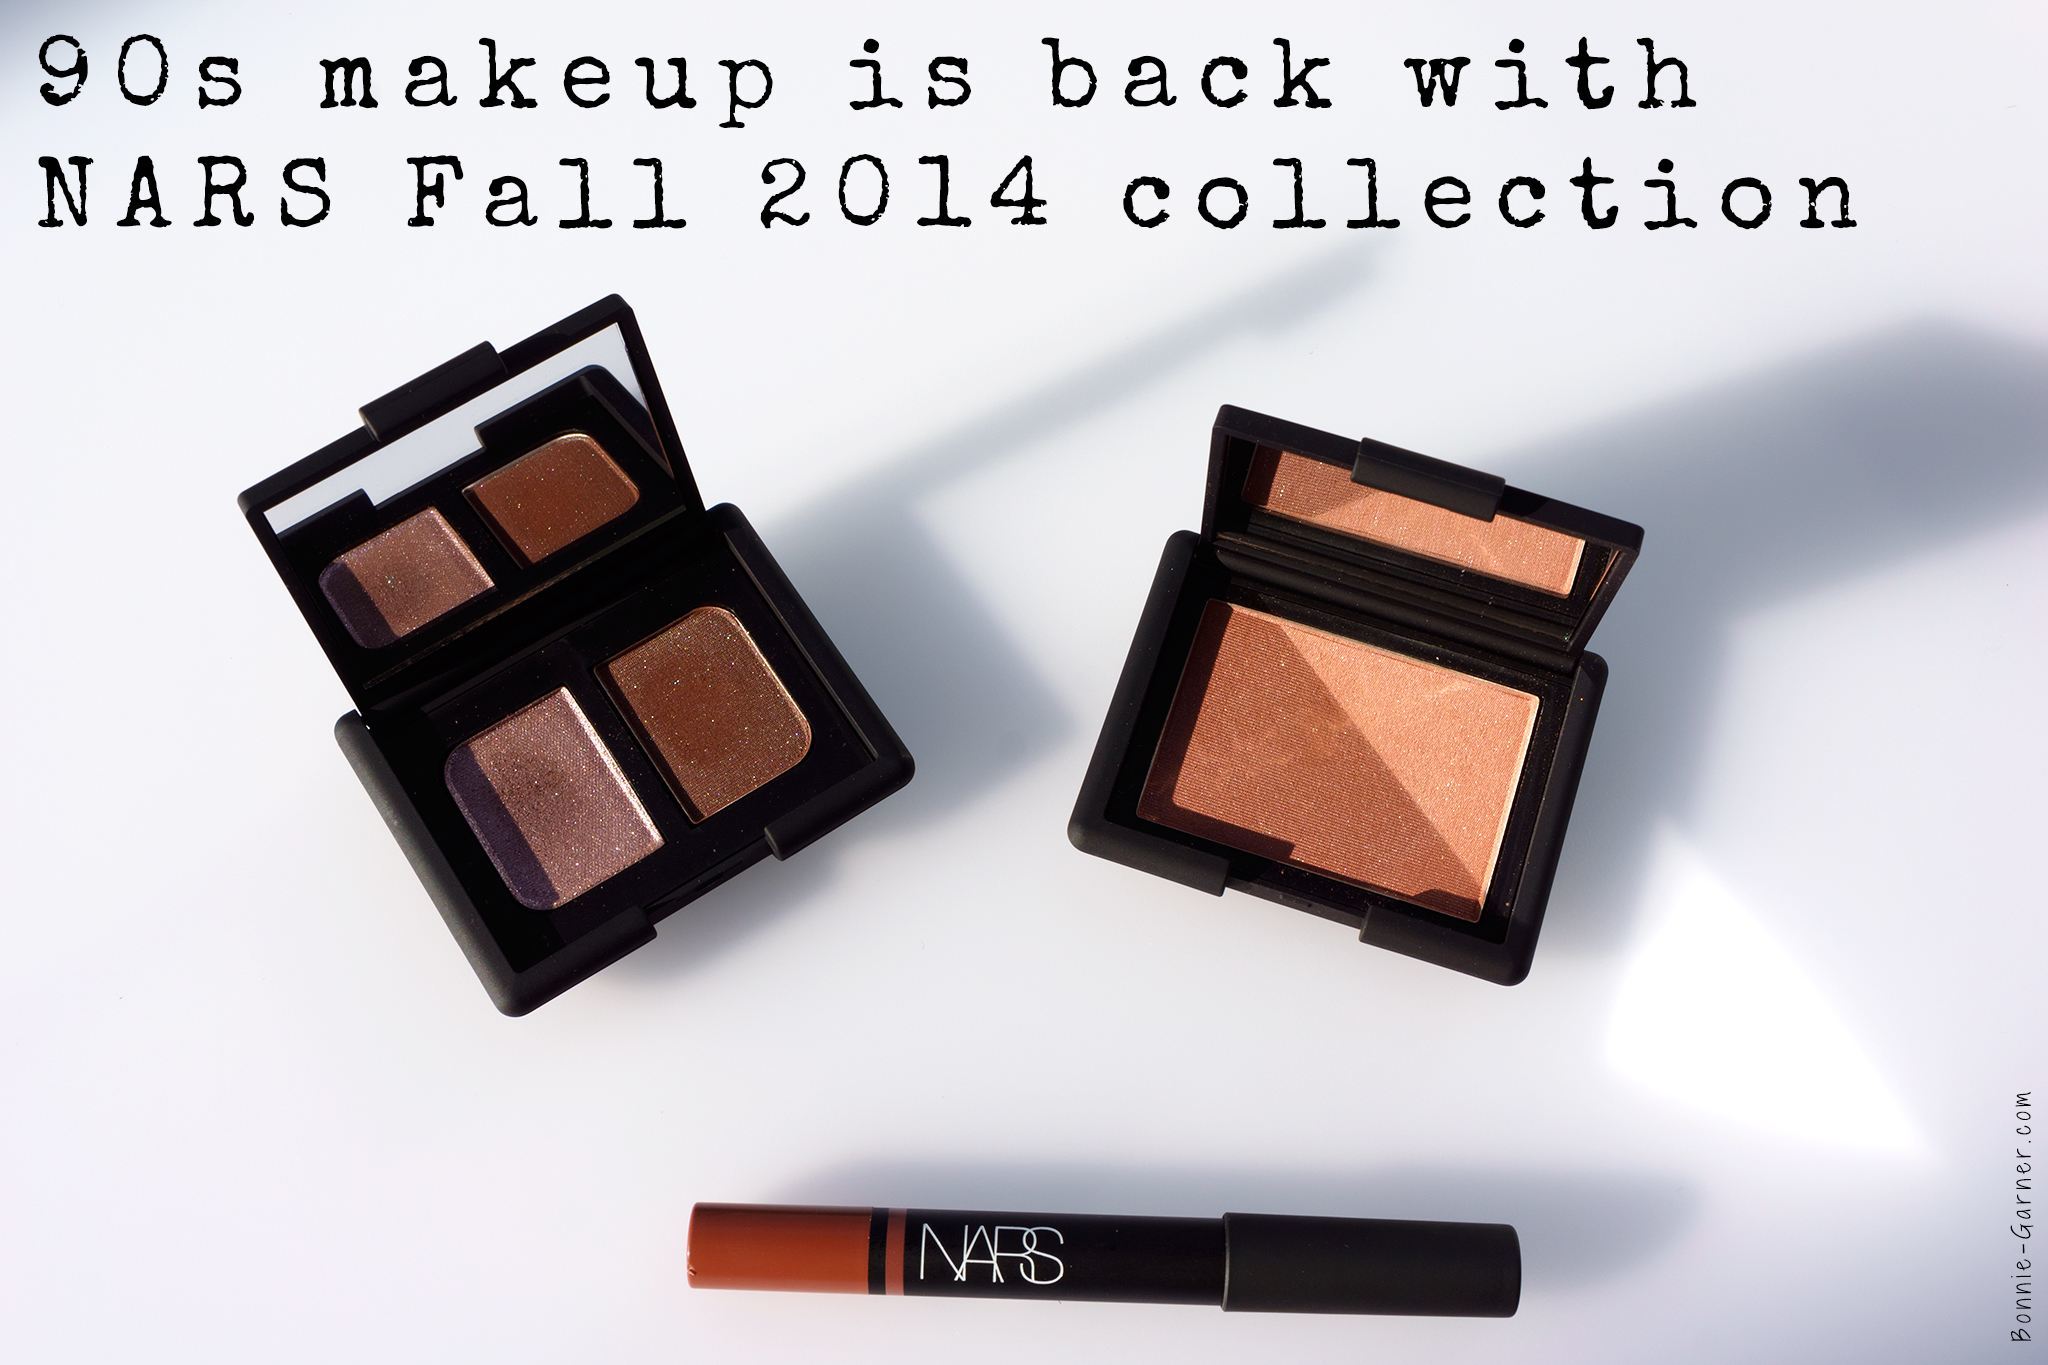 90s makeup is back with NARS Fall 2014 collection